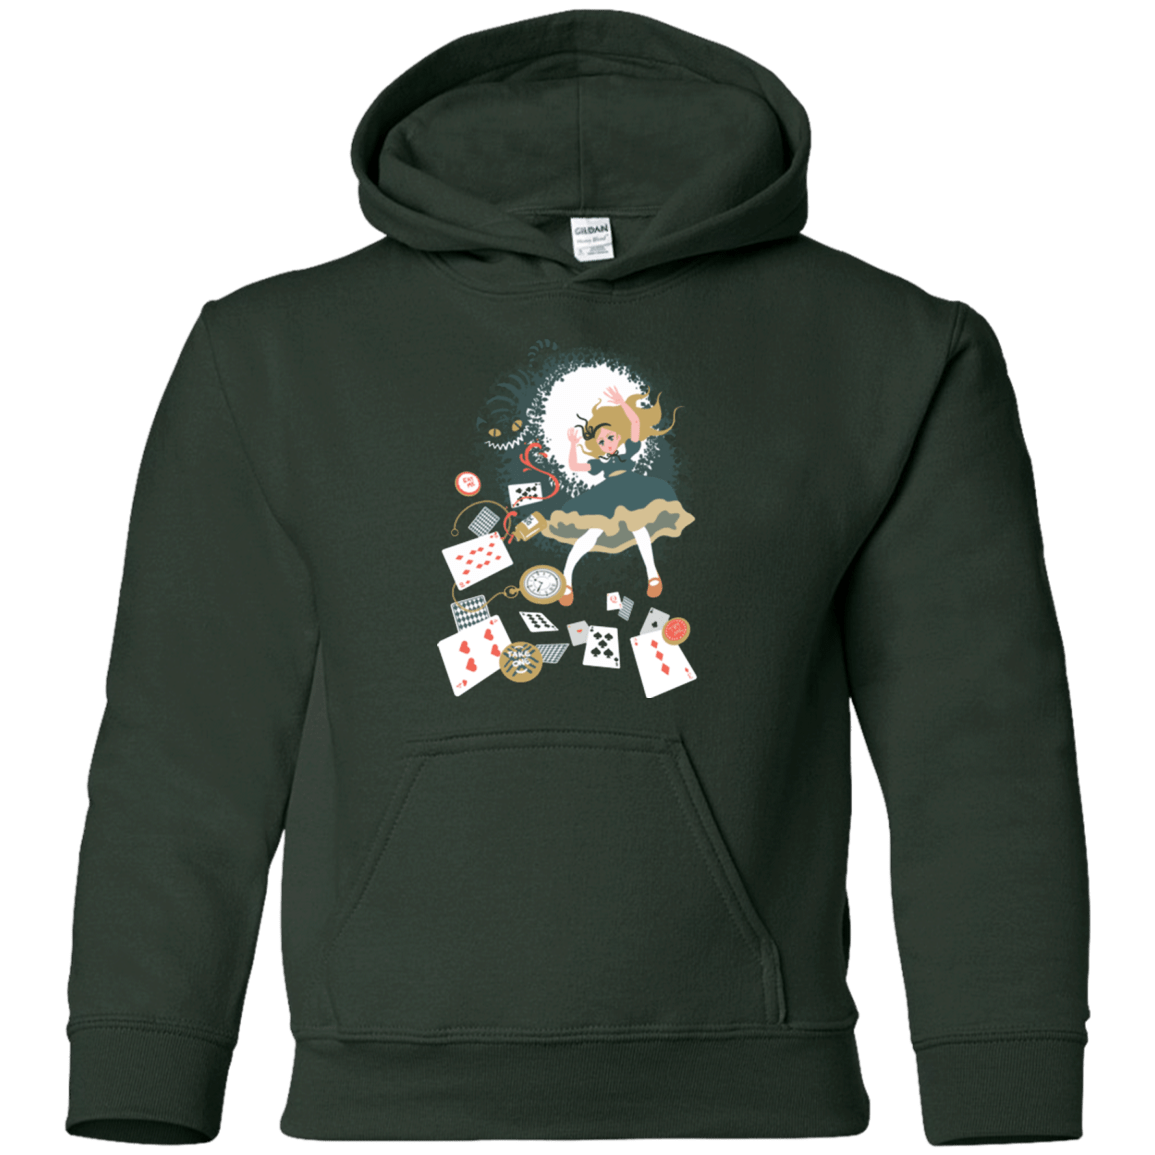 Sweatshirts Forest Green / YS Down the rabbit hole Youth Hoodie